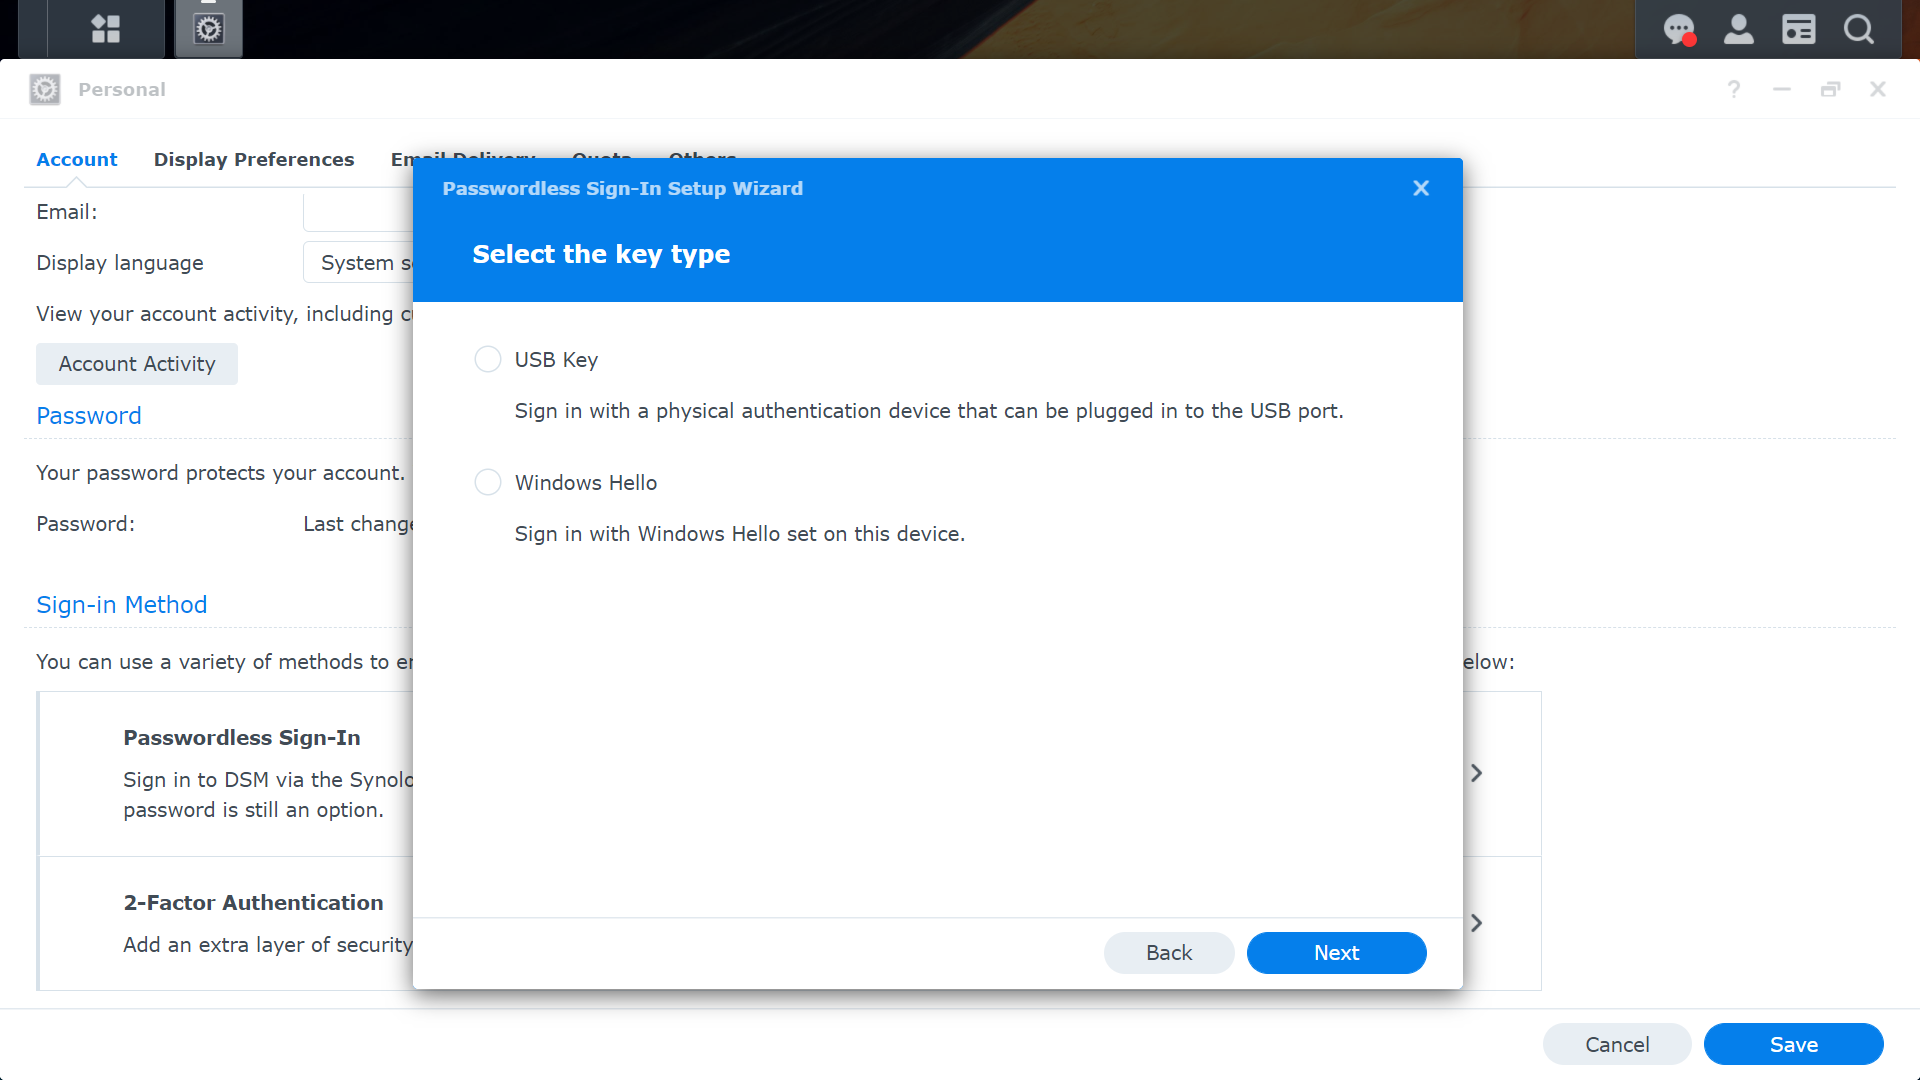 Getting Started with Synology DSM 7.0 Beta 15